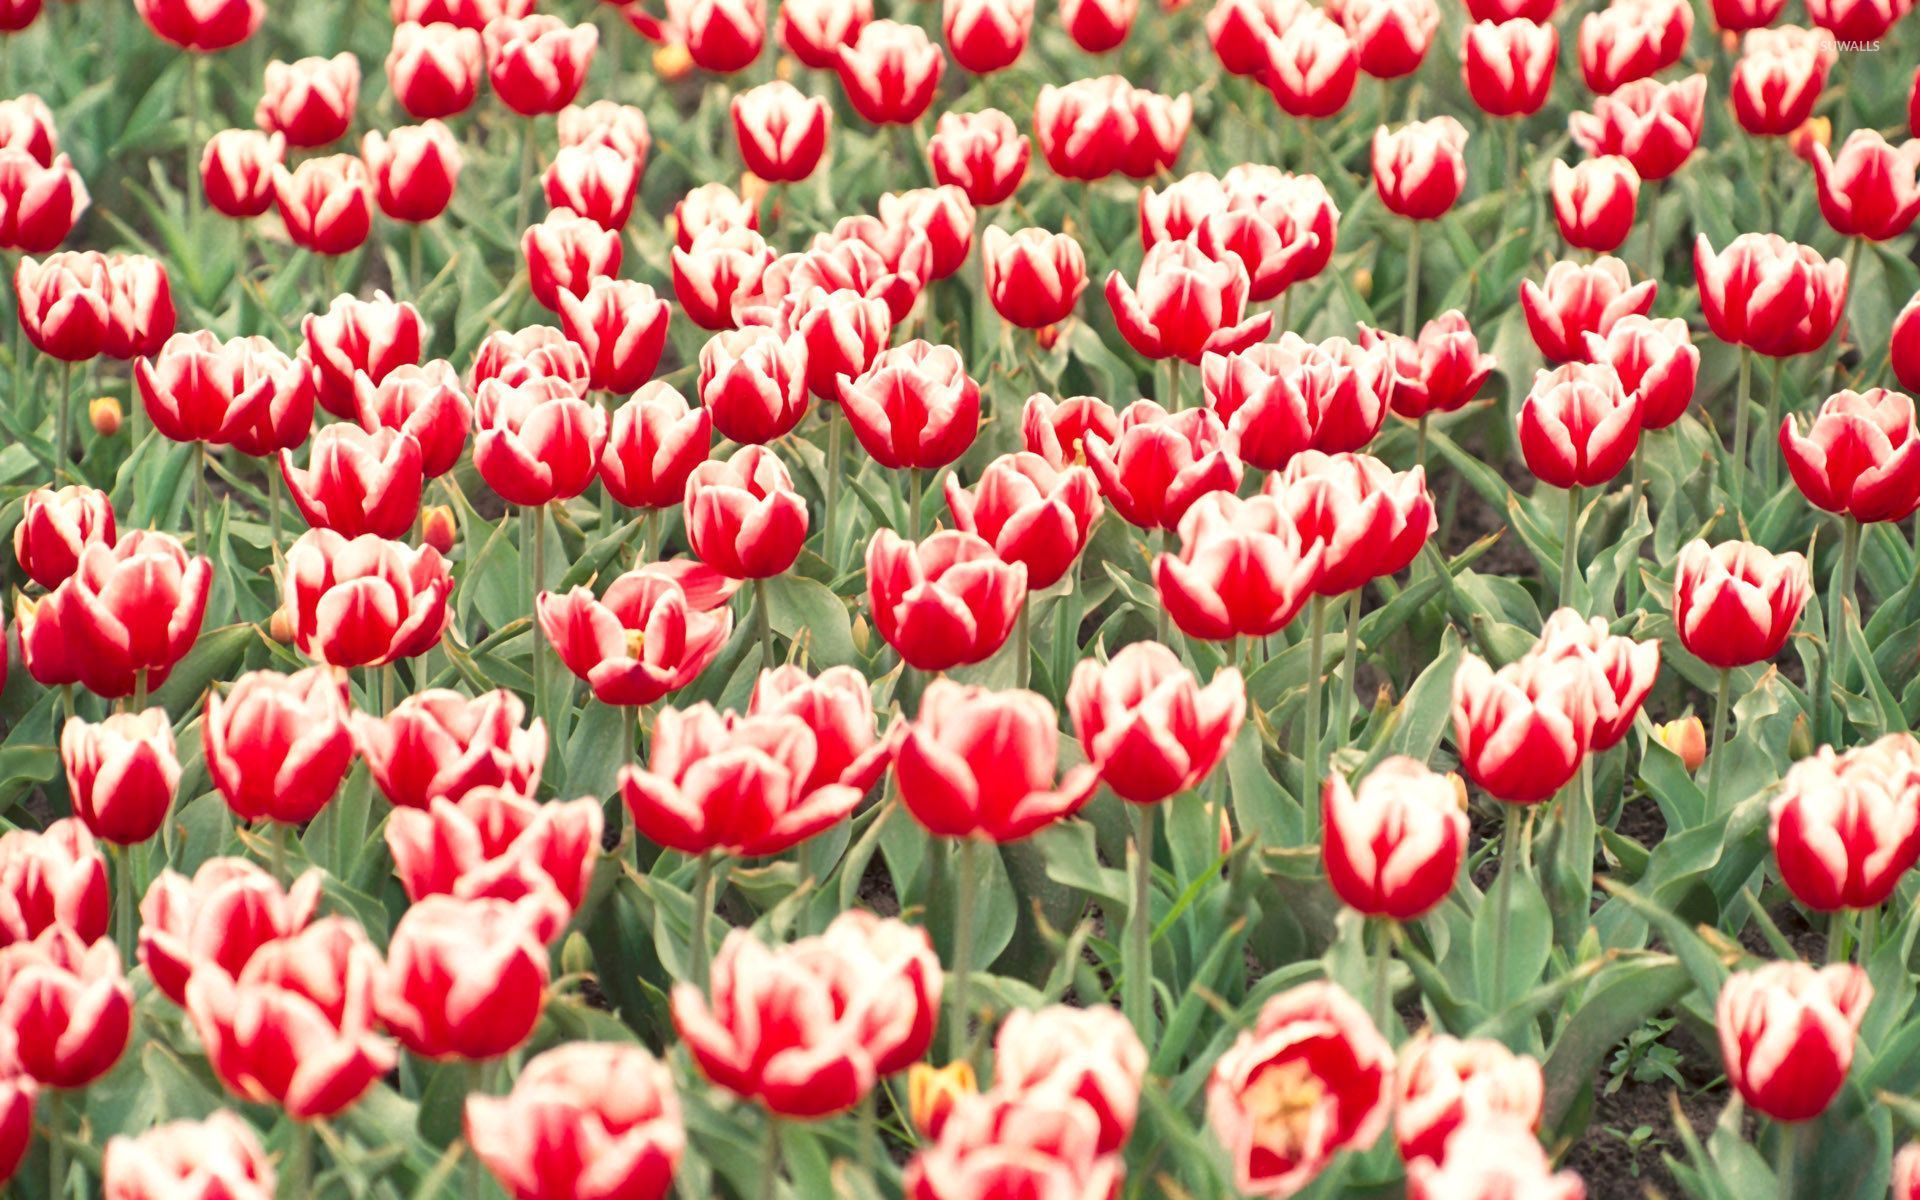 Red and white tulips on the field wallpaper - Flower wallpapers - #54209